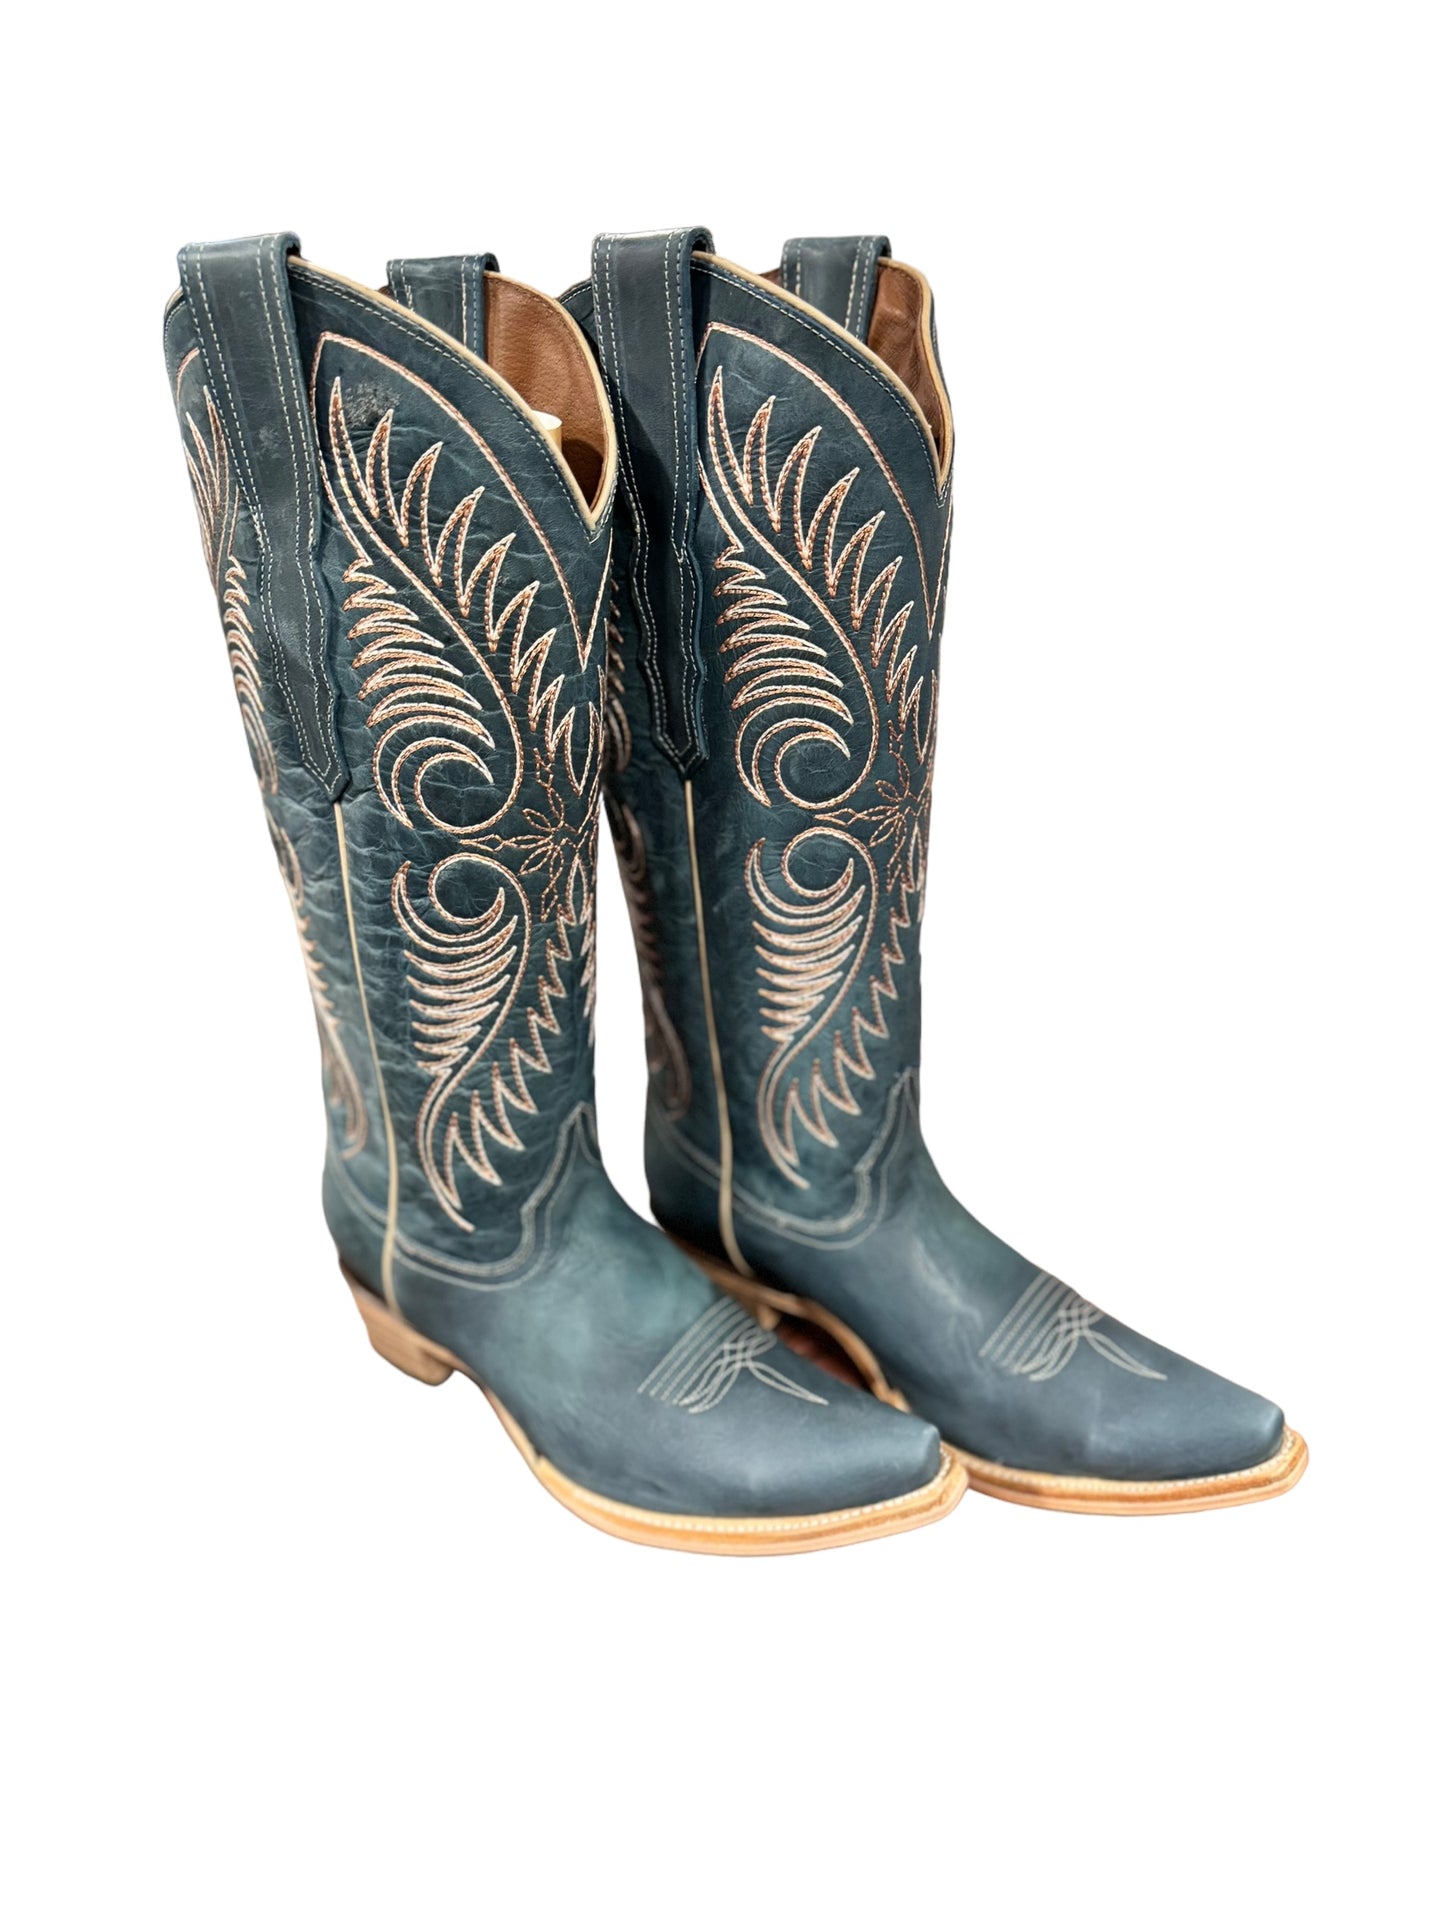 Dusty Blue Embroidered Circle G Cowgirl Boots